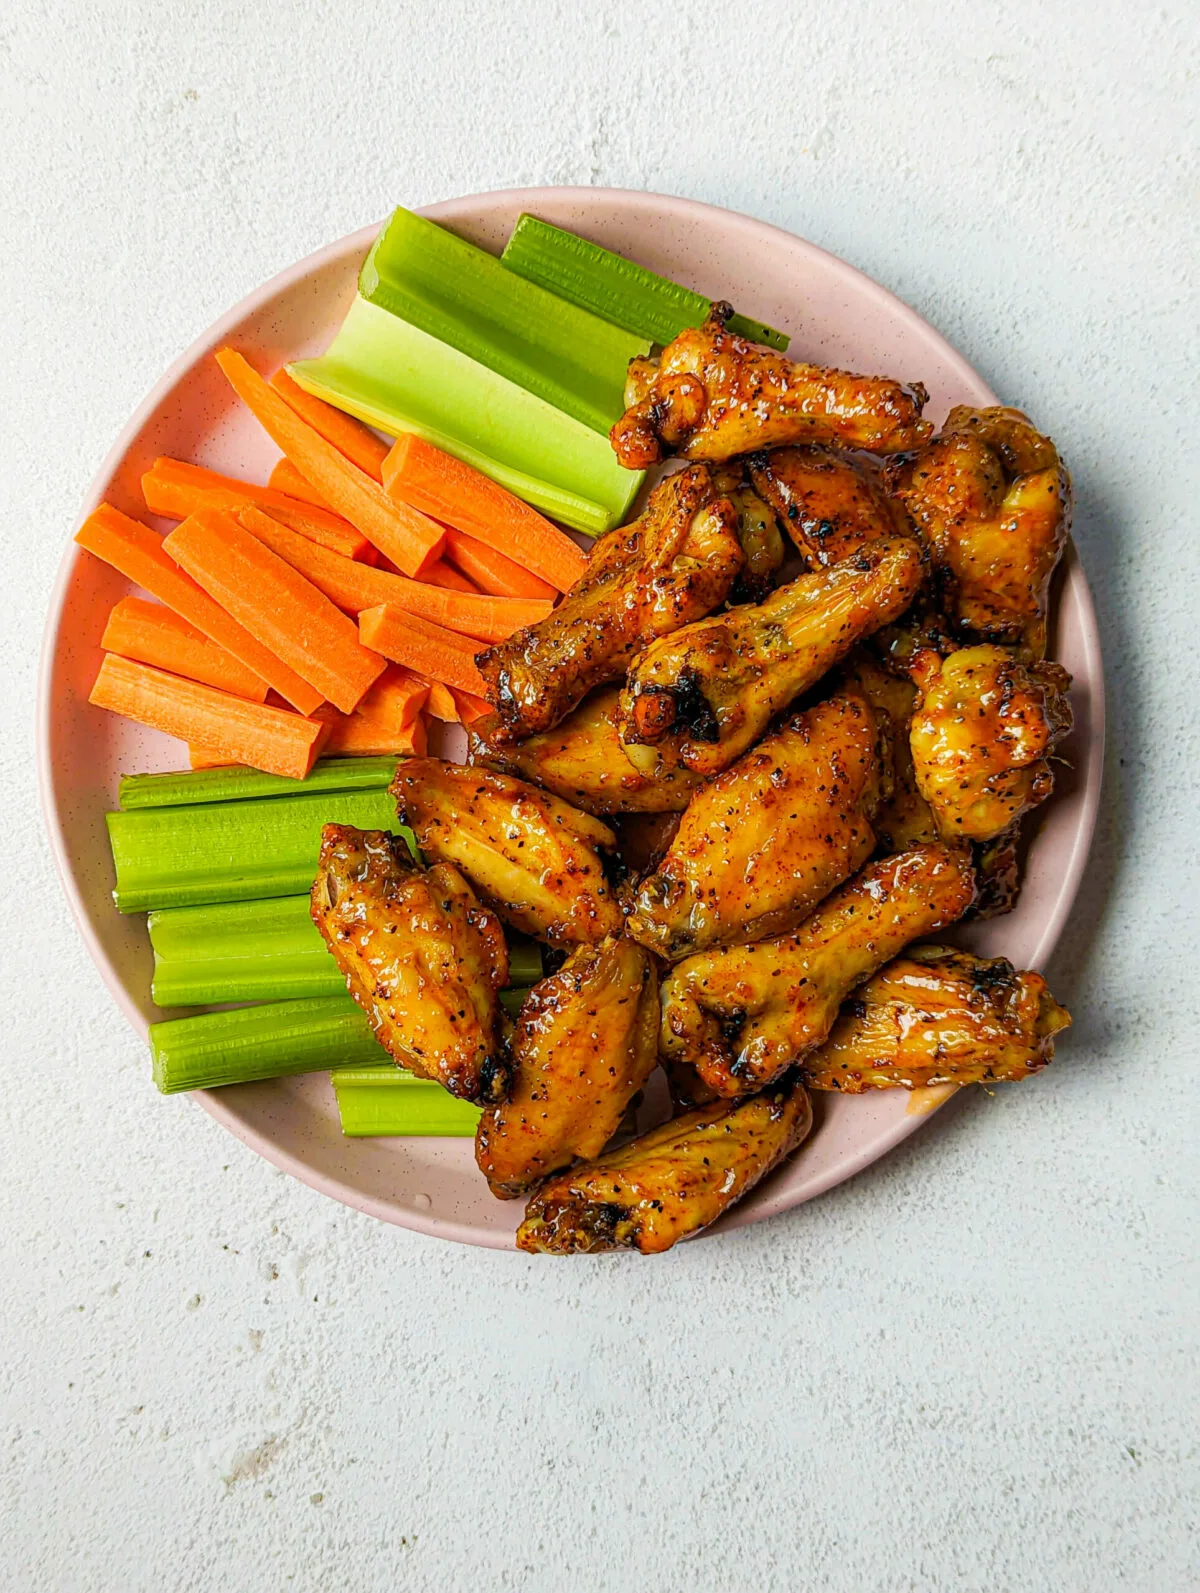 A close up of hot honey lemon pepper wings on a plate with vegetables.